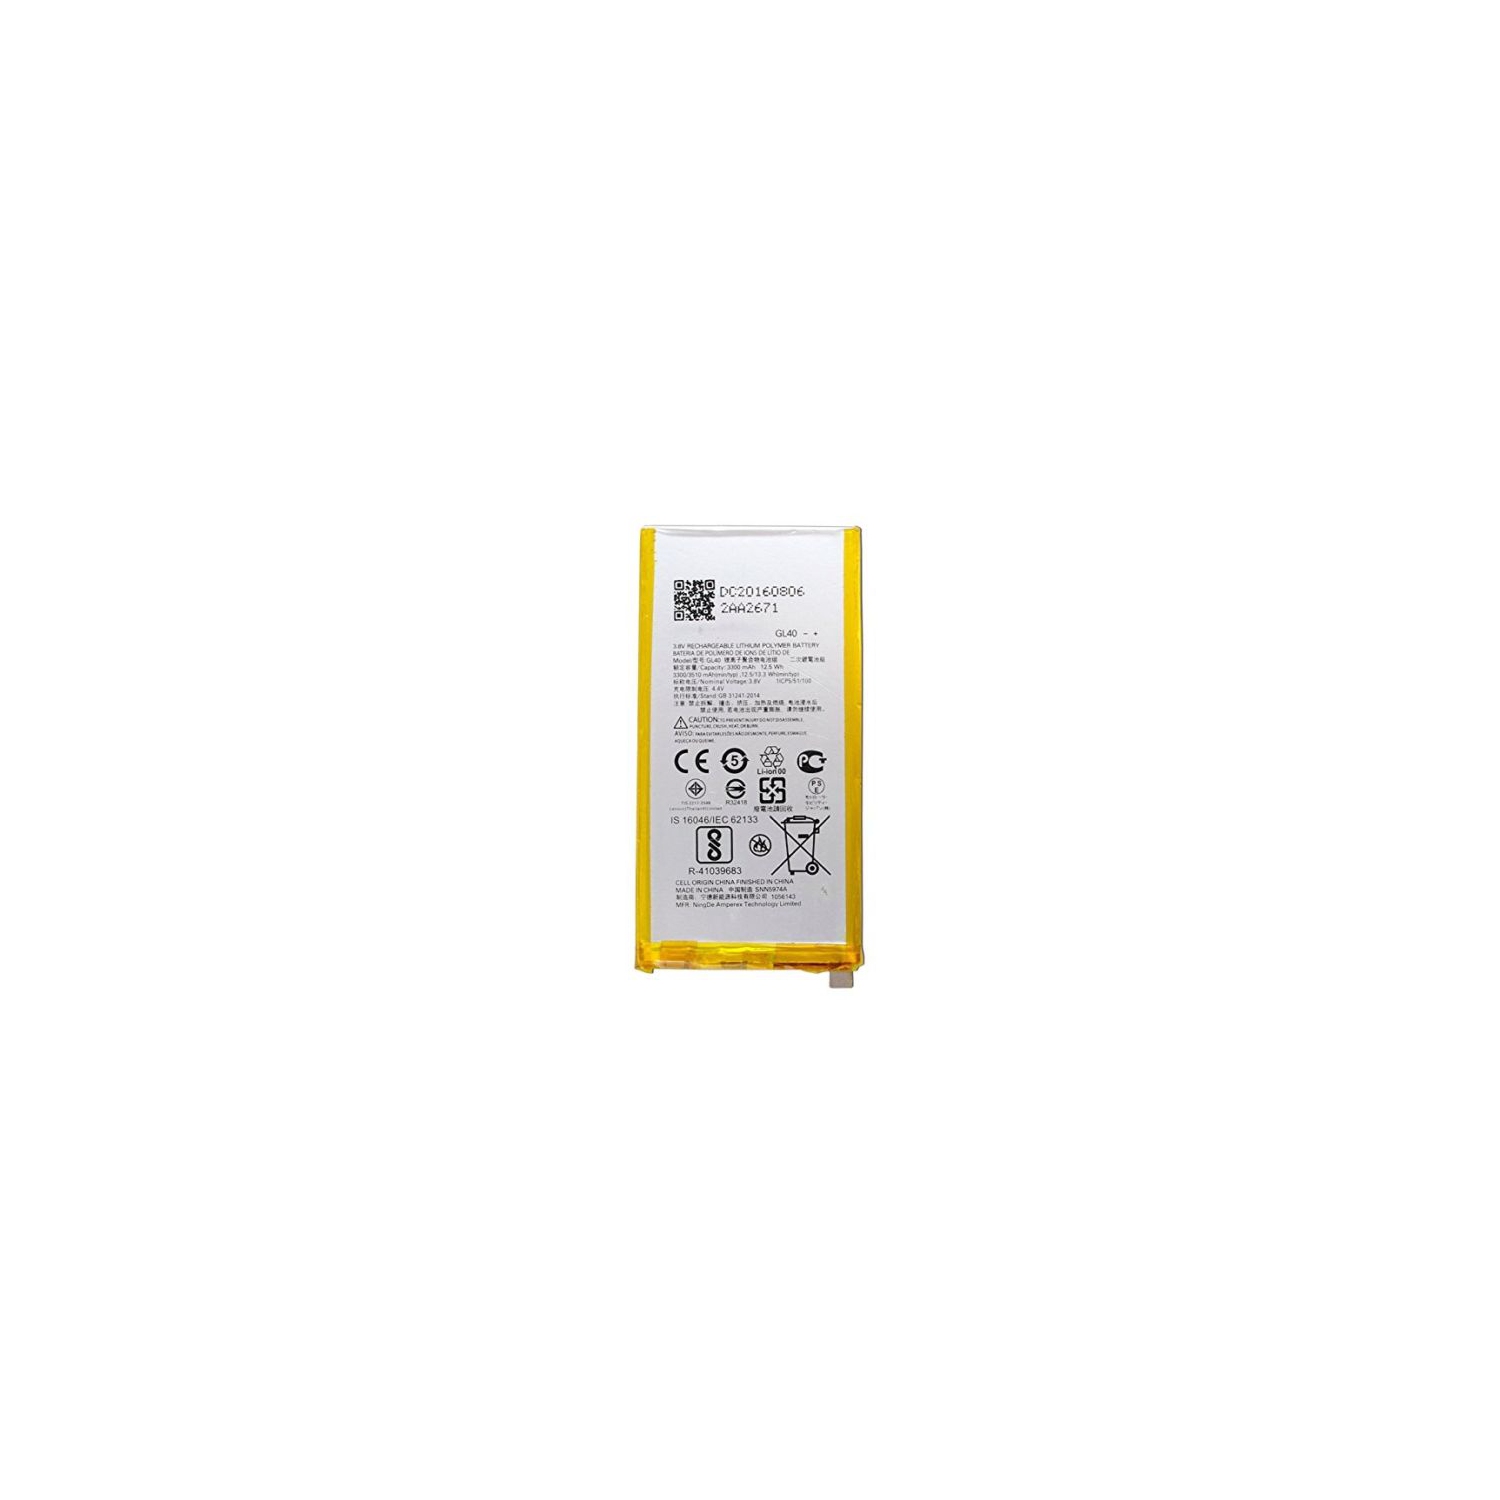 Replacement Battery for Motorola Moto Z Play Droid, XT1635 GL40